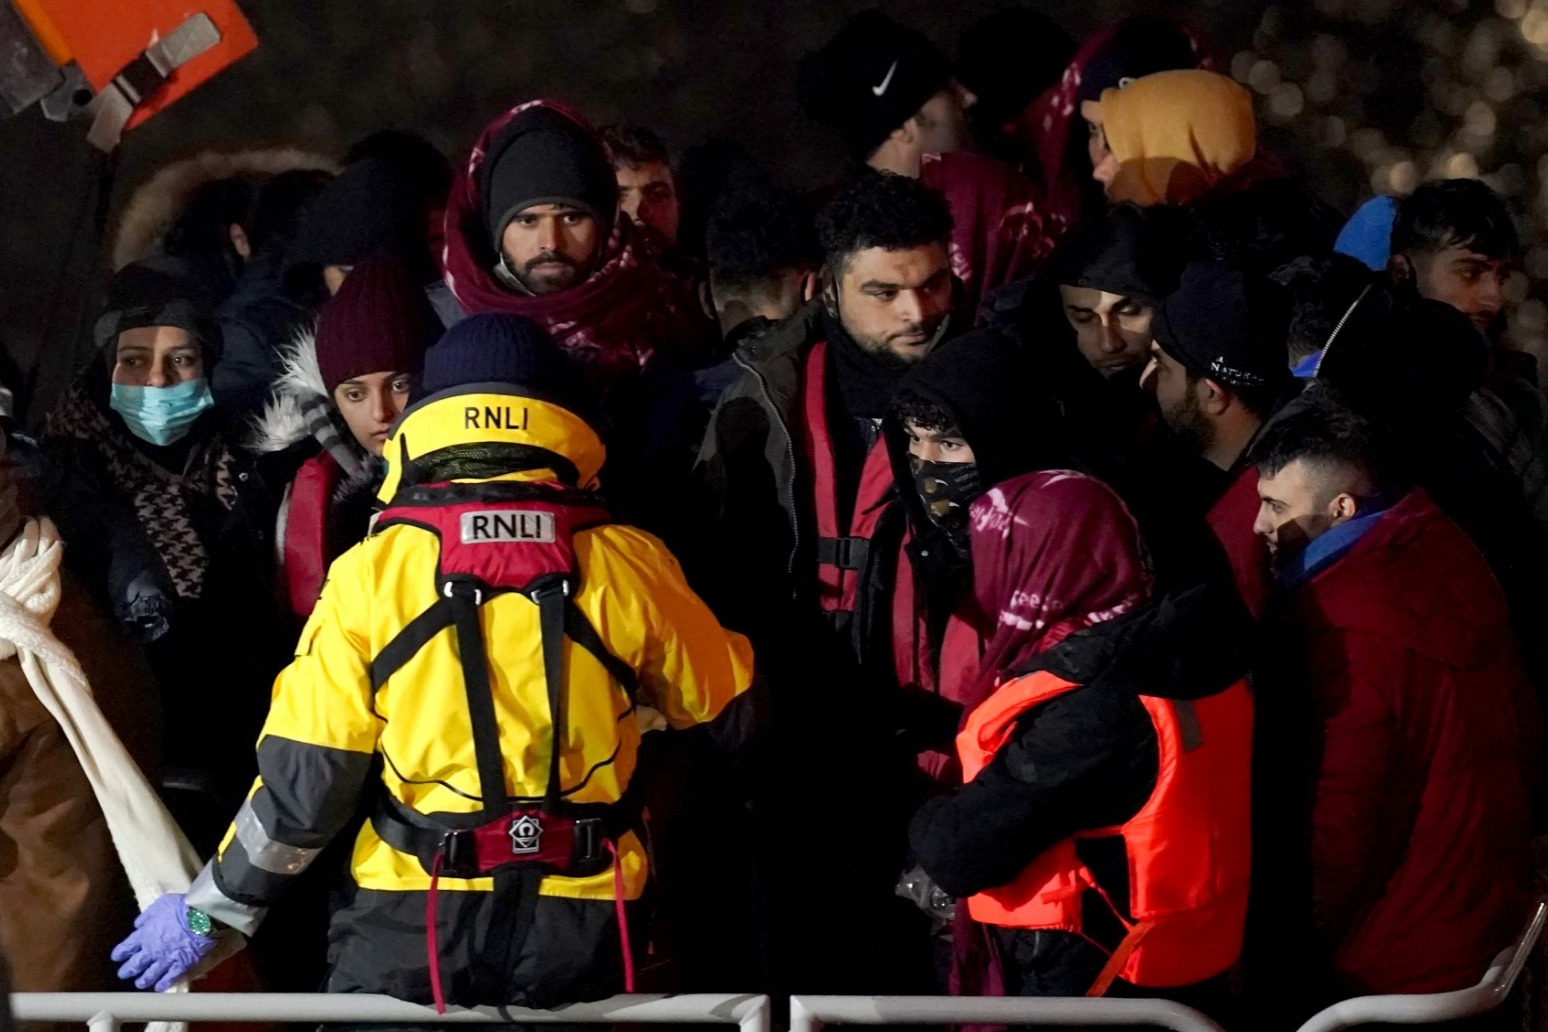 More migrants rescued from Channel following crossing death